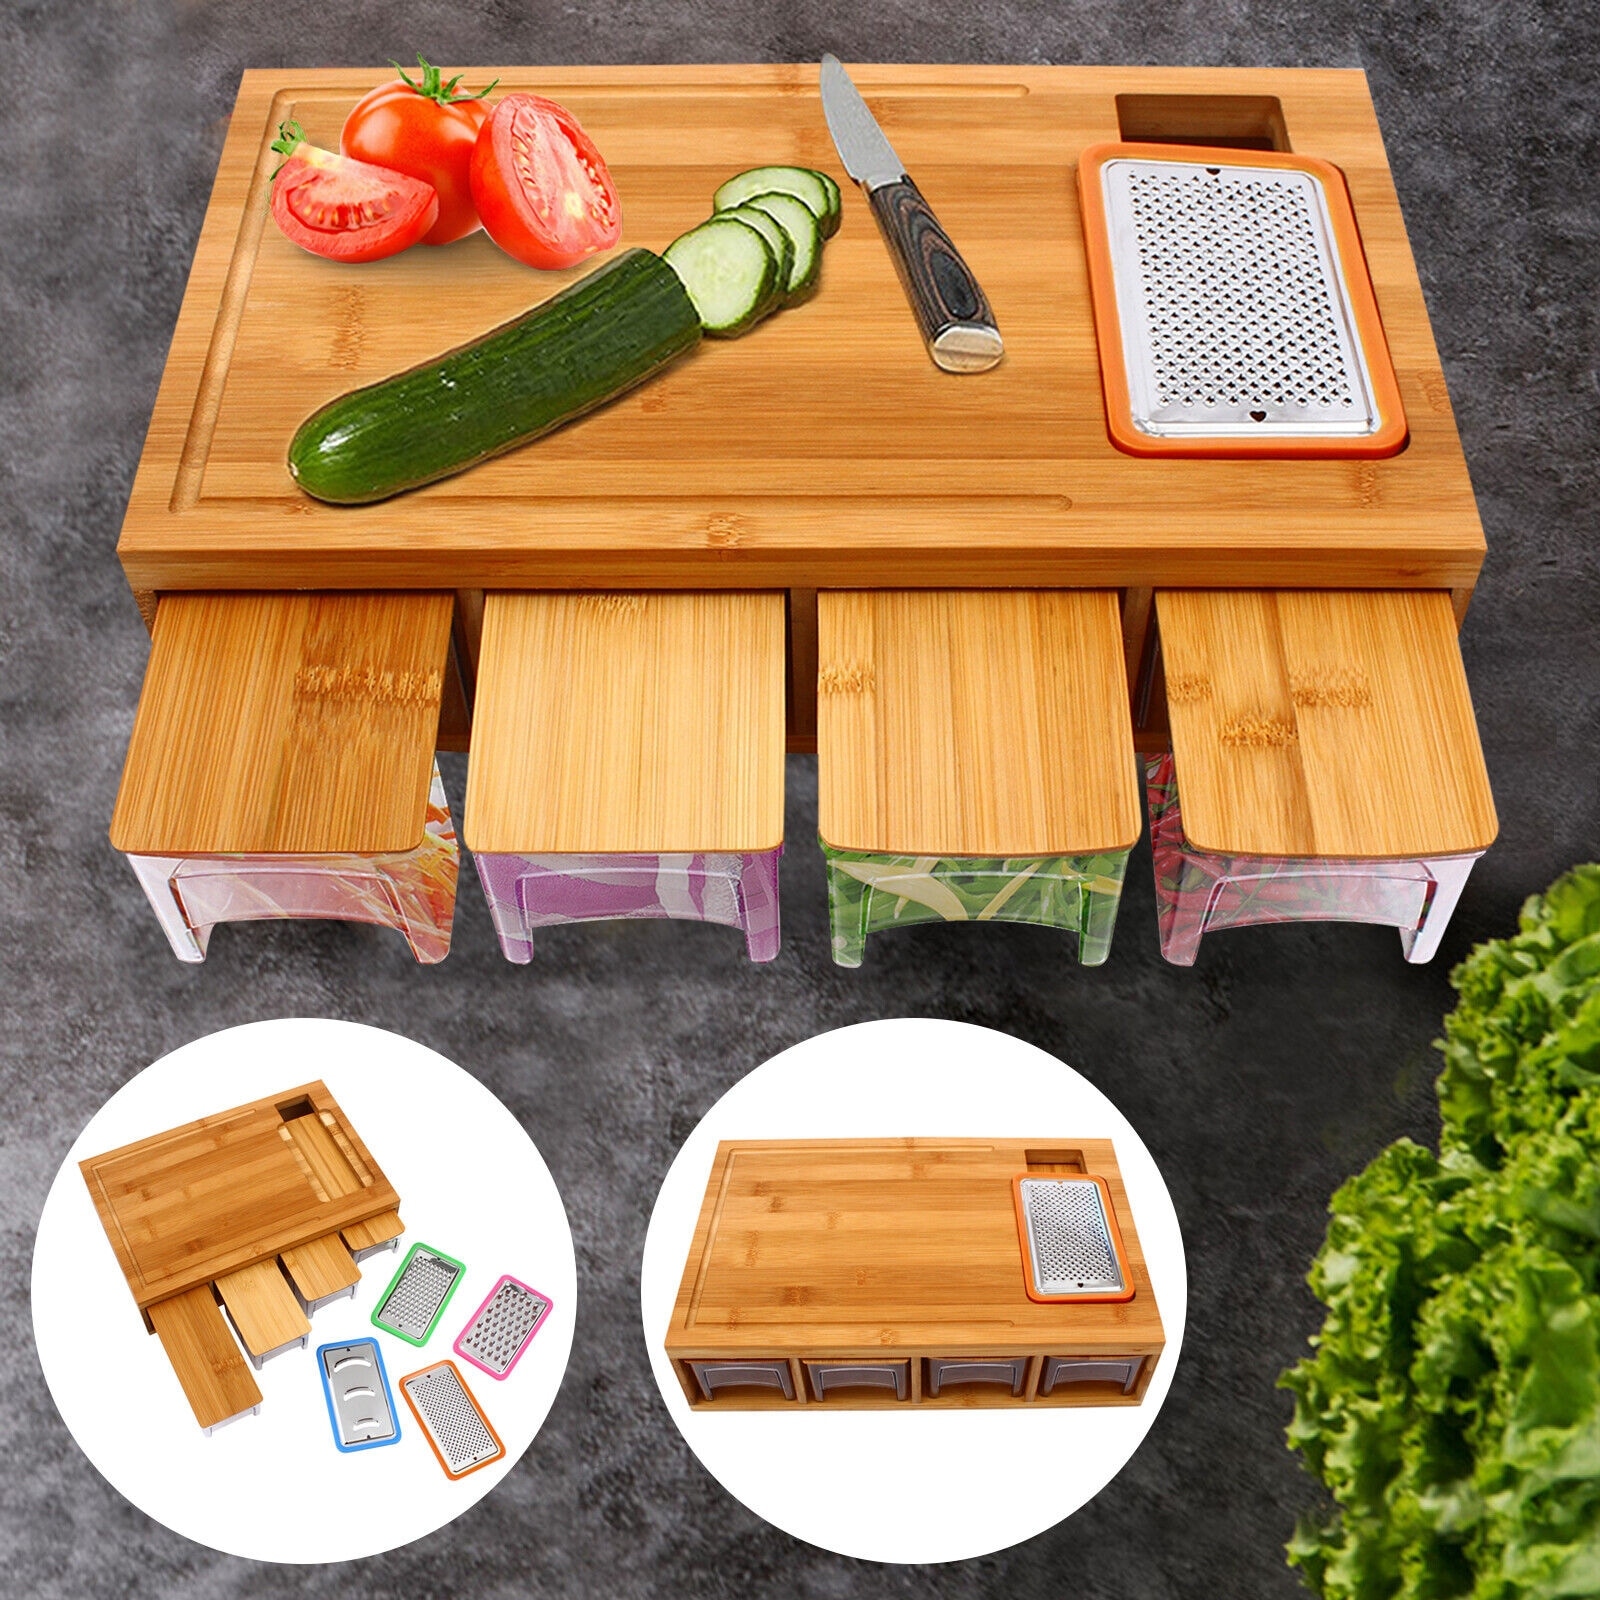 https://ak1.ostkcdn.com/images/products/is/images/direct/1567baa2024c317d3d26892aef1be48893d589e6/Organic-Bamboo-Cutting-Board-with-4-Containers.jpg